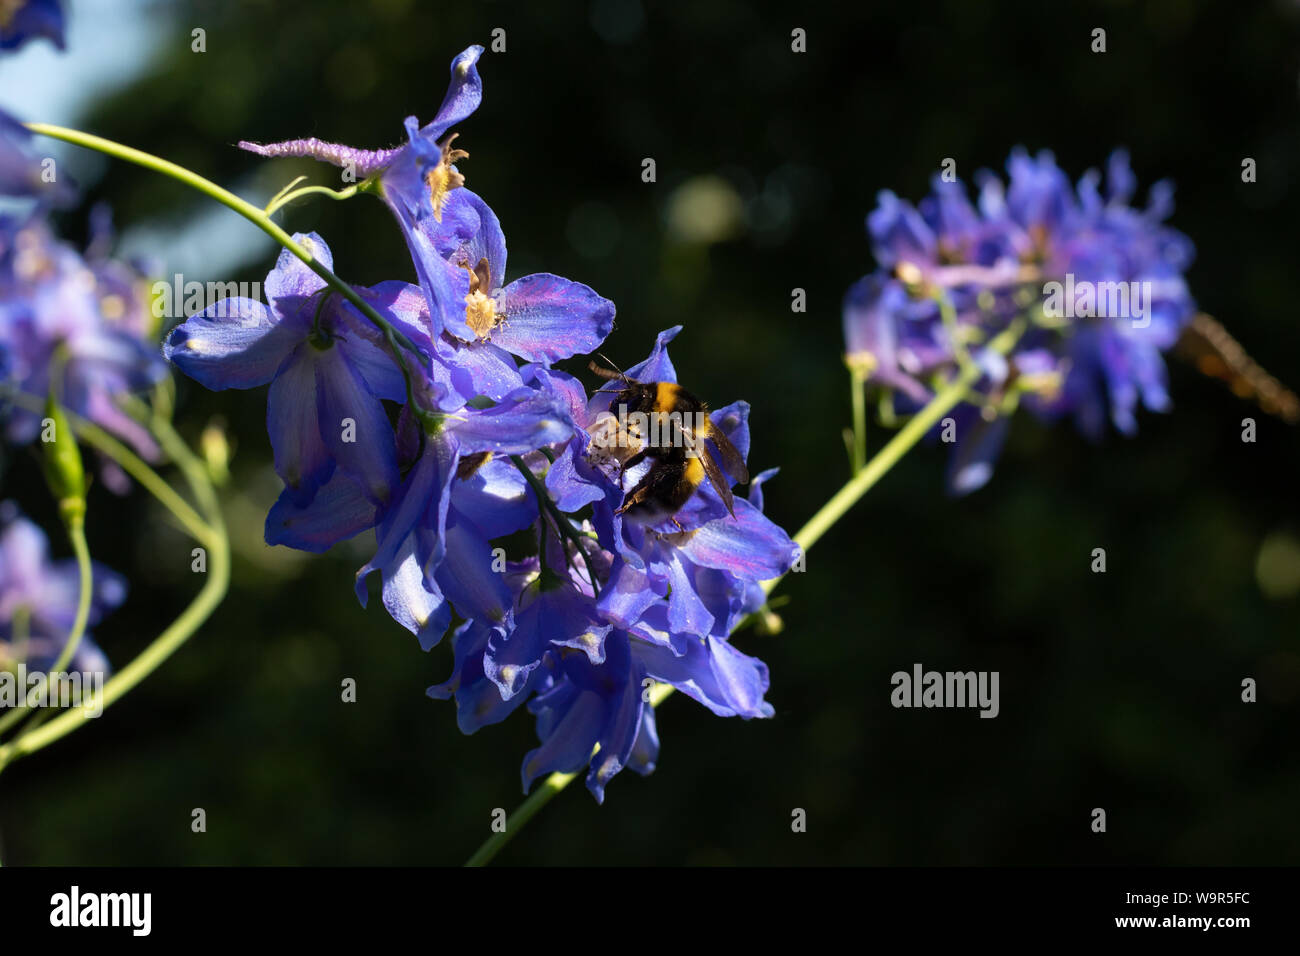 Bumblebee collects nectar in blue colors. Wildflowers bloom in the garden Stock Photo